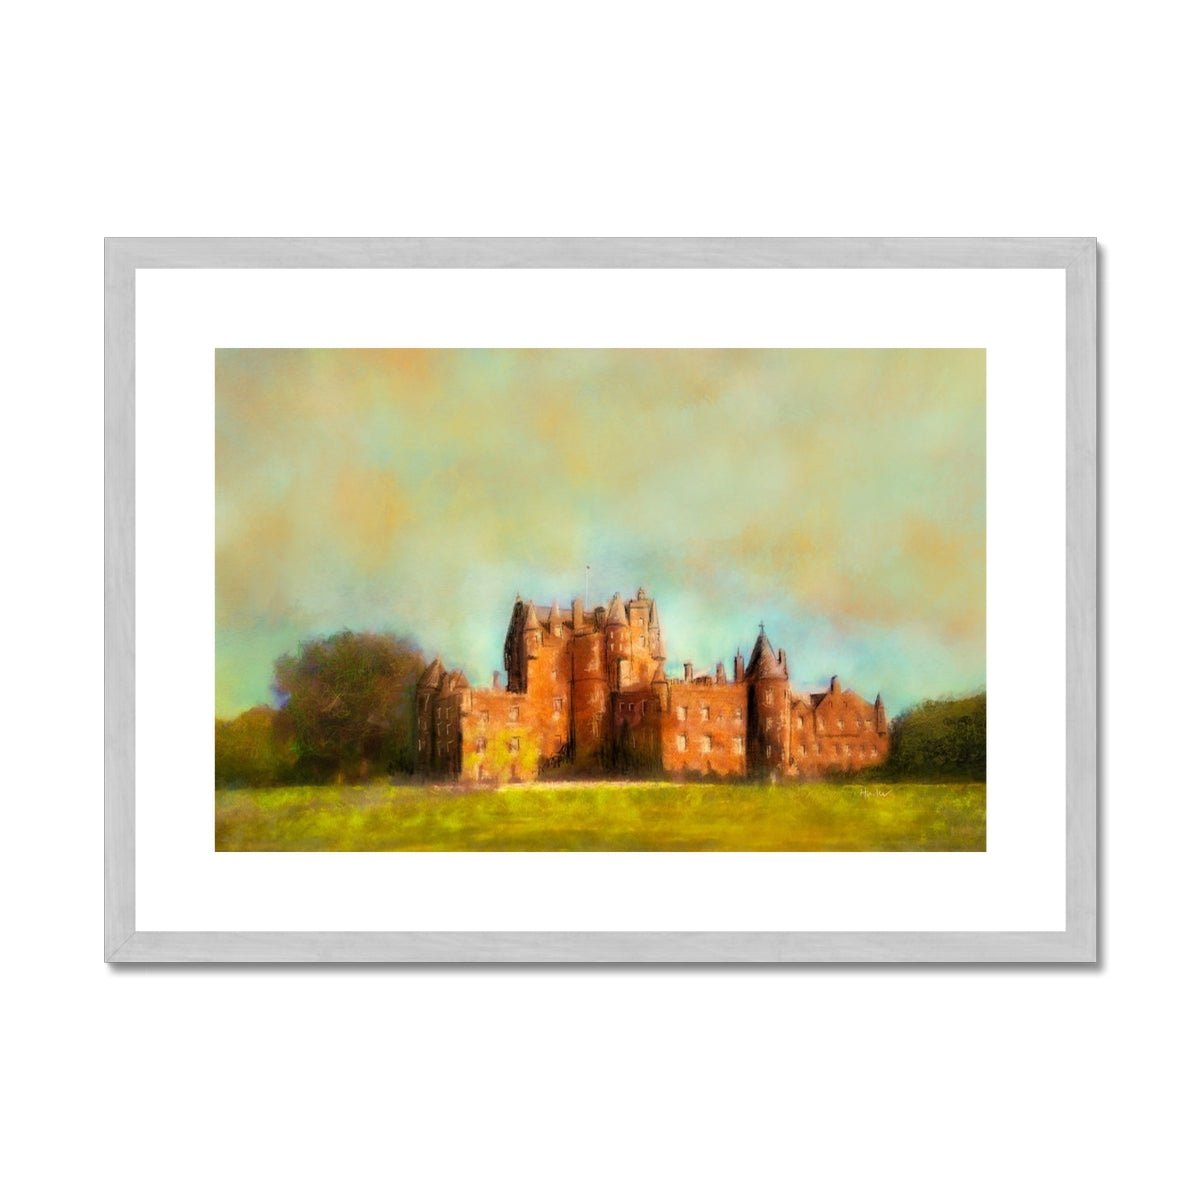 Glamis Castle Painting | Antique Framed & Mounted Prints From Scotland-Antique Framed & Mounted Prints-Scottish Castles Art Gallery-A2 Landscape-Silver Frame-Paintings, Prints, Homeware, Art Gifts From Scotland By Scottish Artist Kevin Hunter